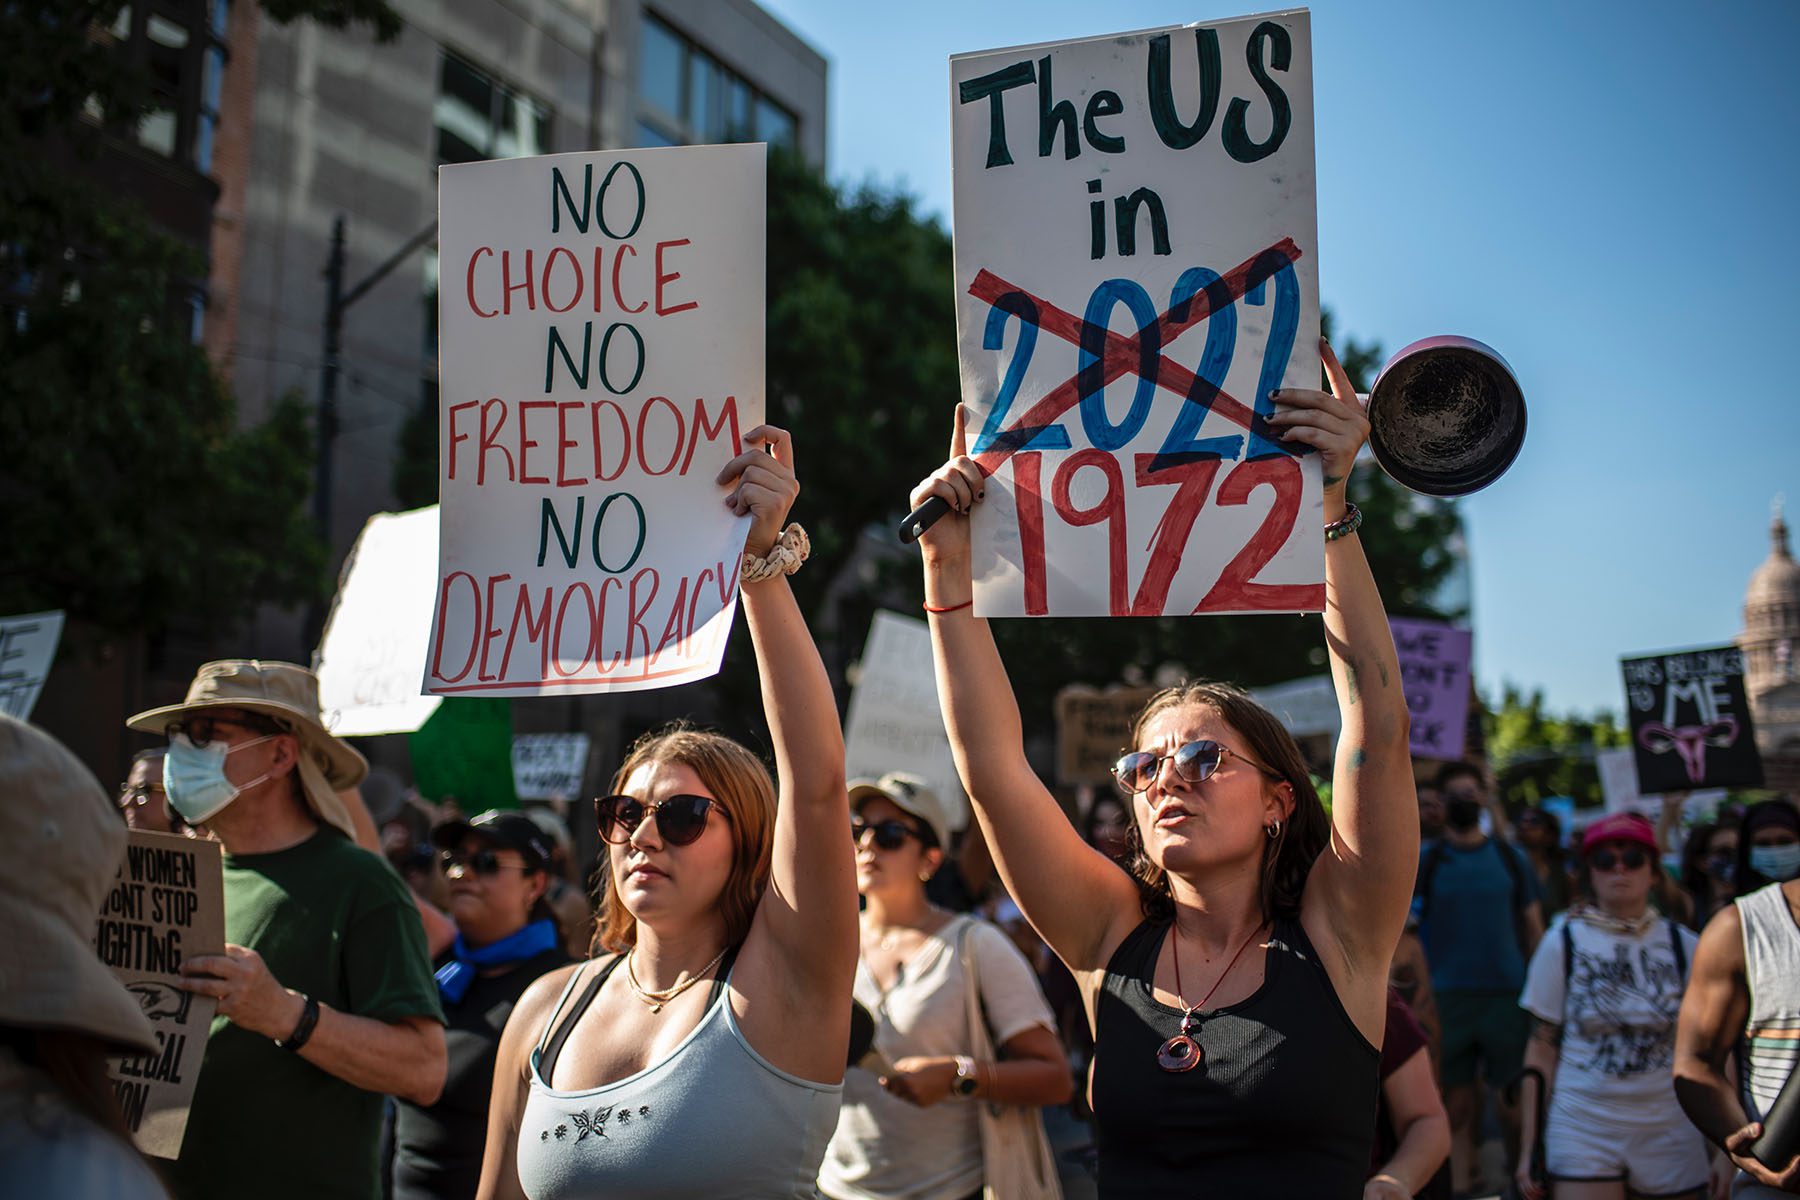 Protesters march while holding signs during an abortion-rights rally in Austin, Texas. The signs read "No choice, no freedom, no democracy" and "The US in 2022 [crossed out] 1972"